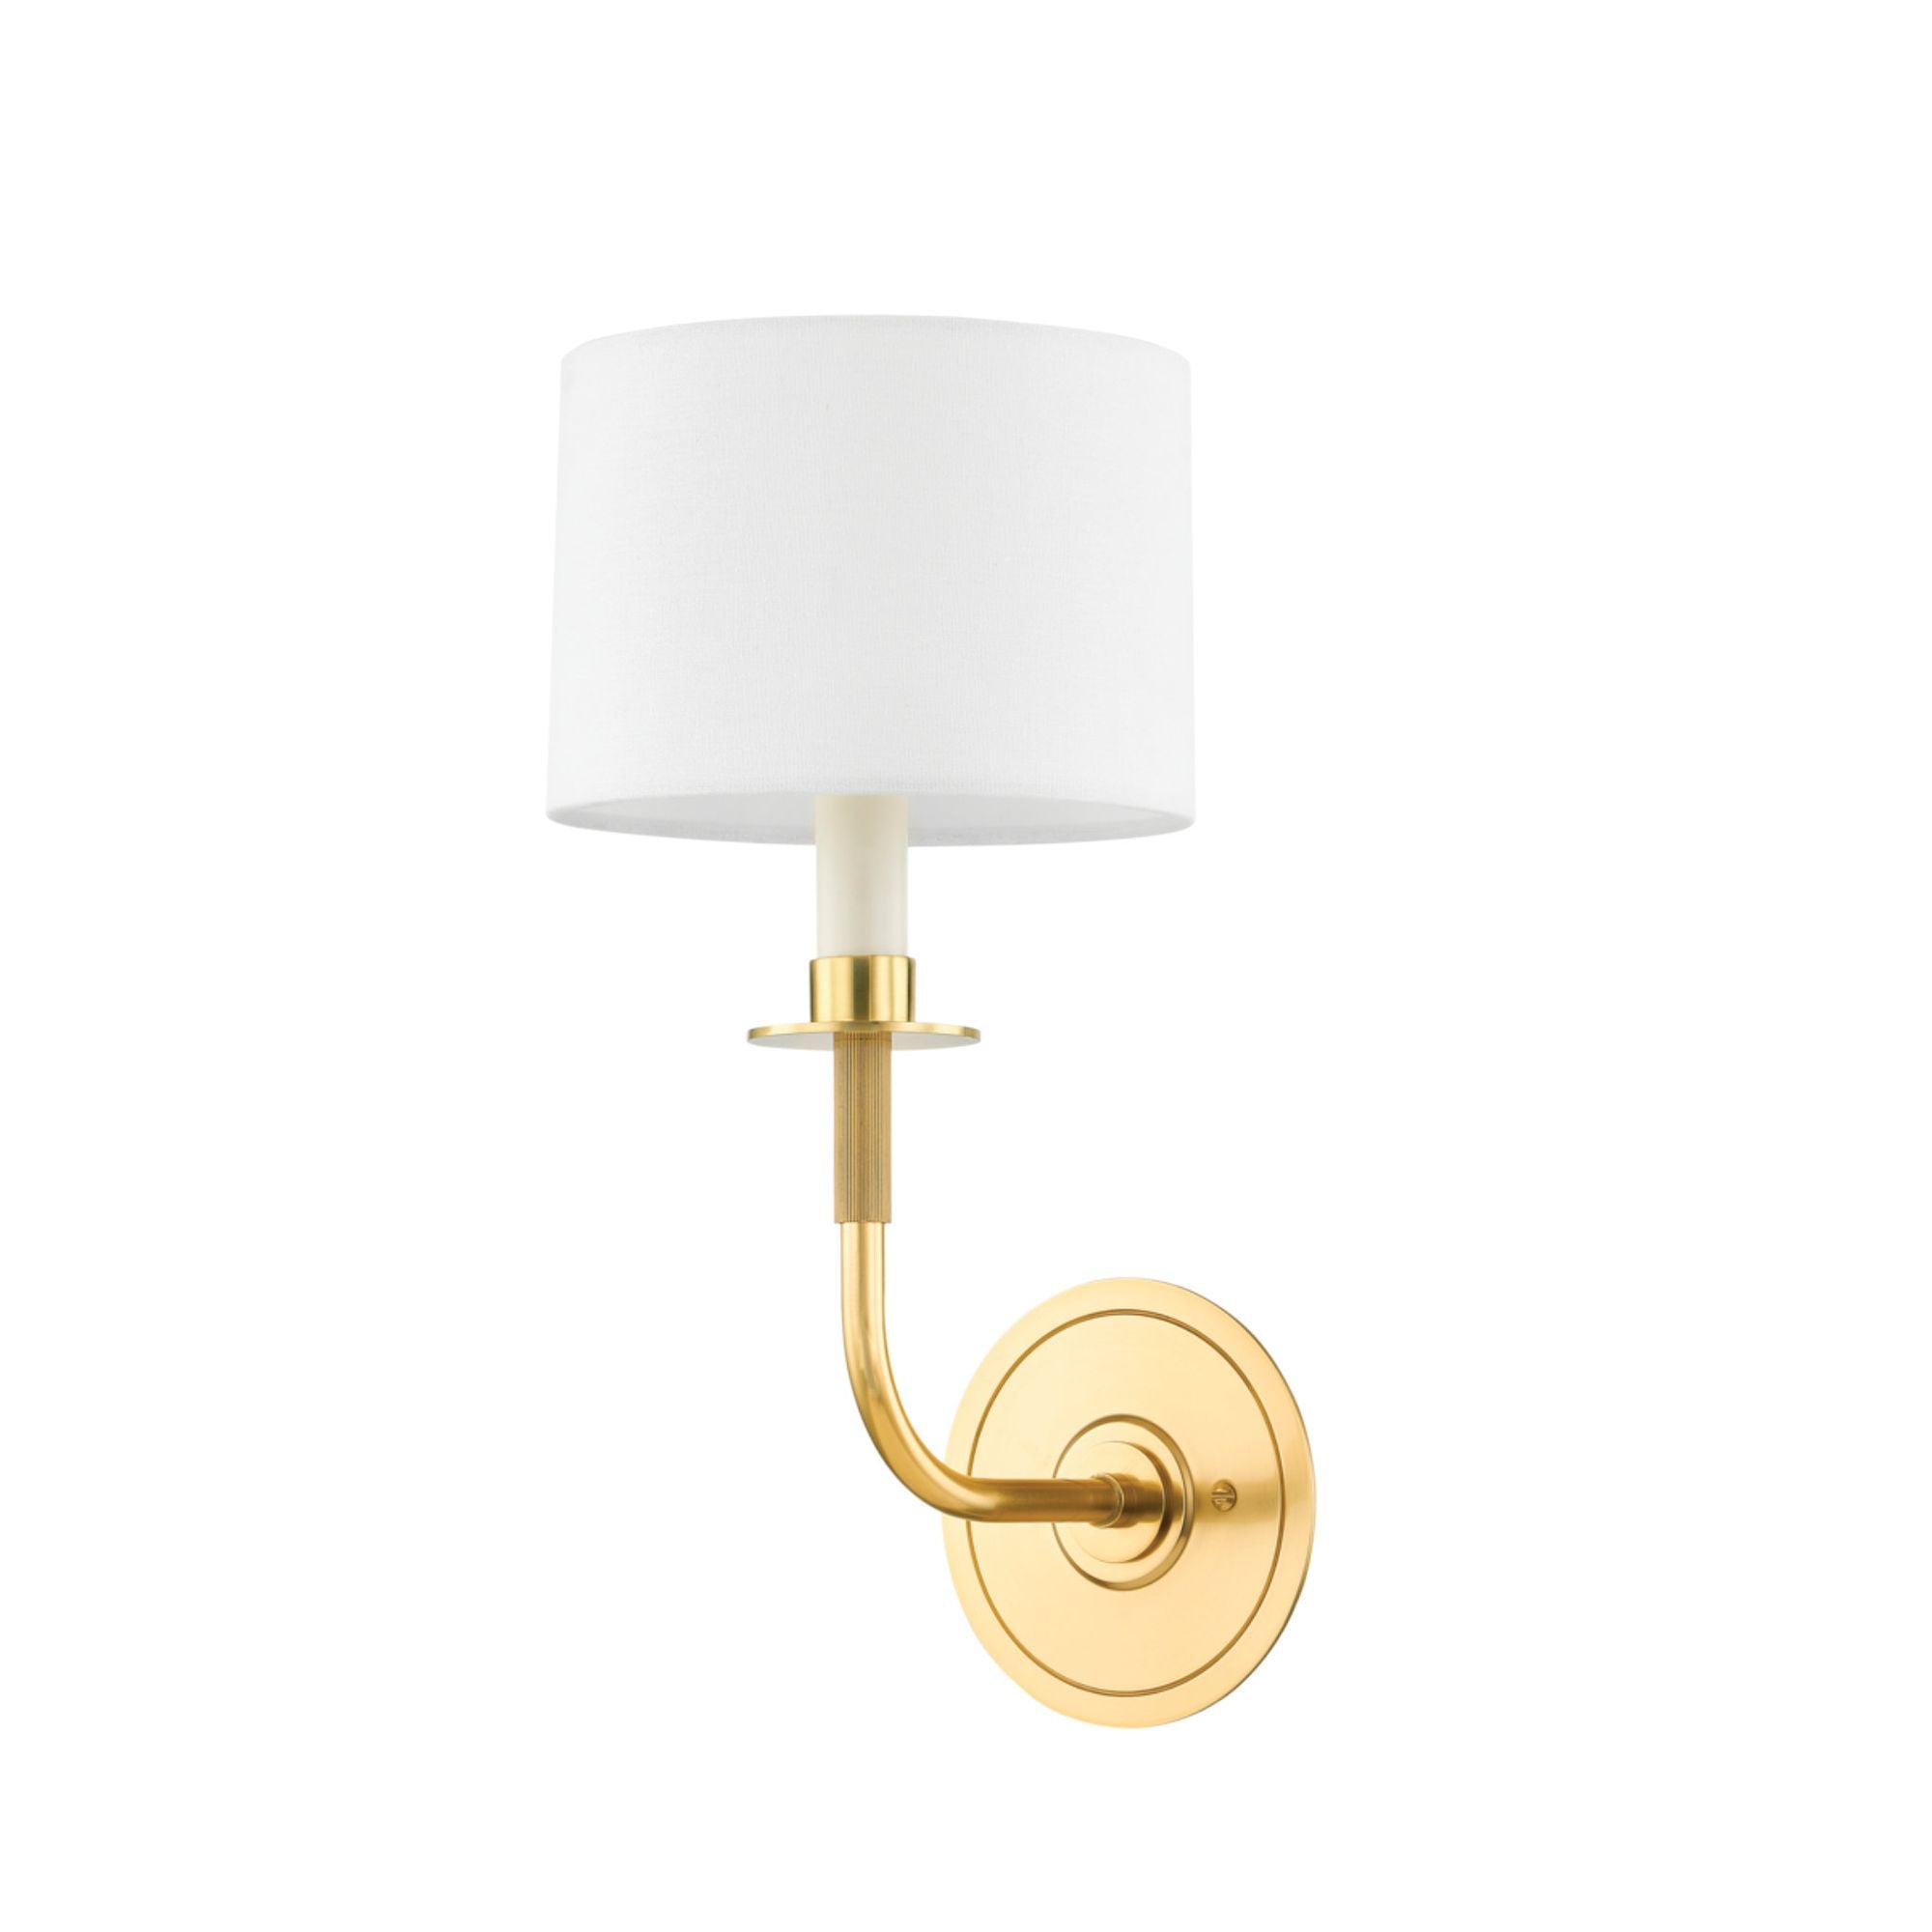 Paramus 1 Light Wall Sconce in Aged Brass